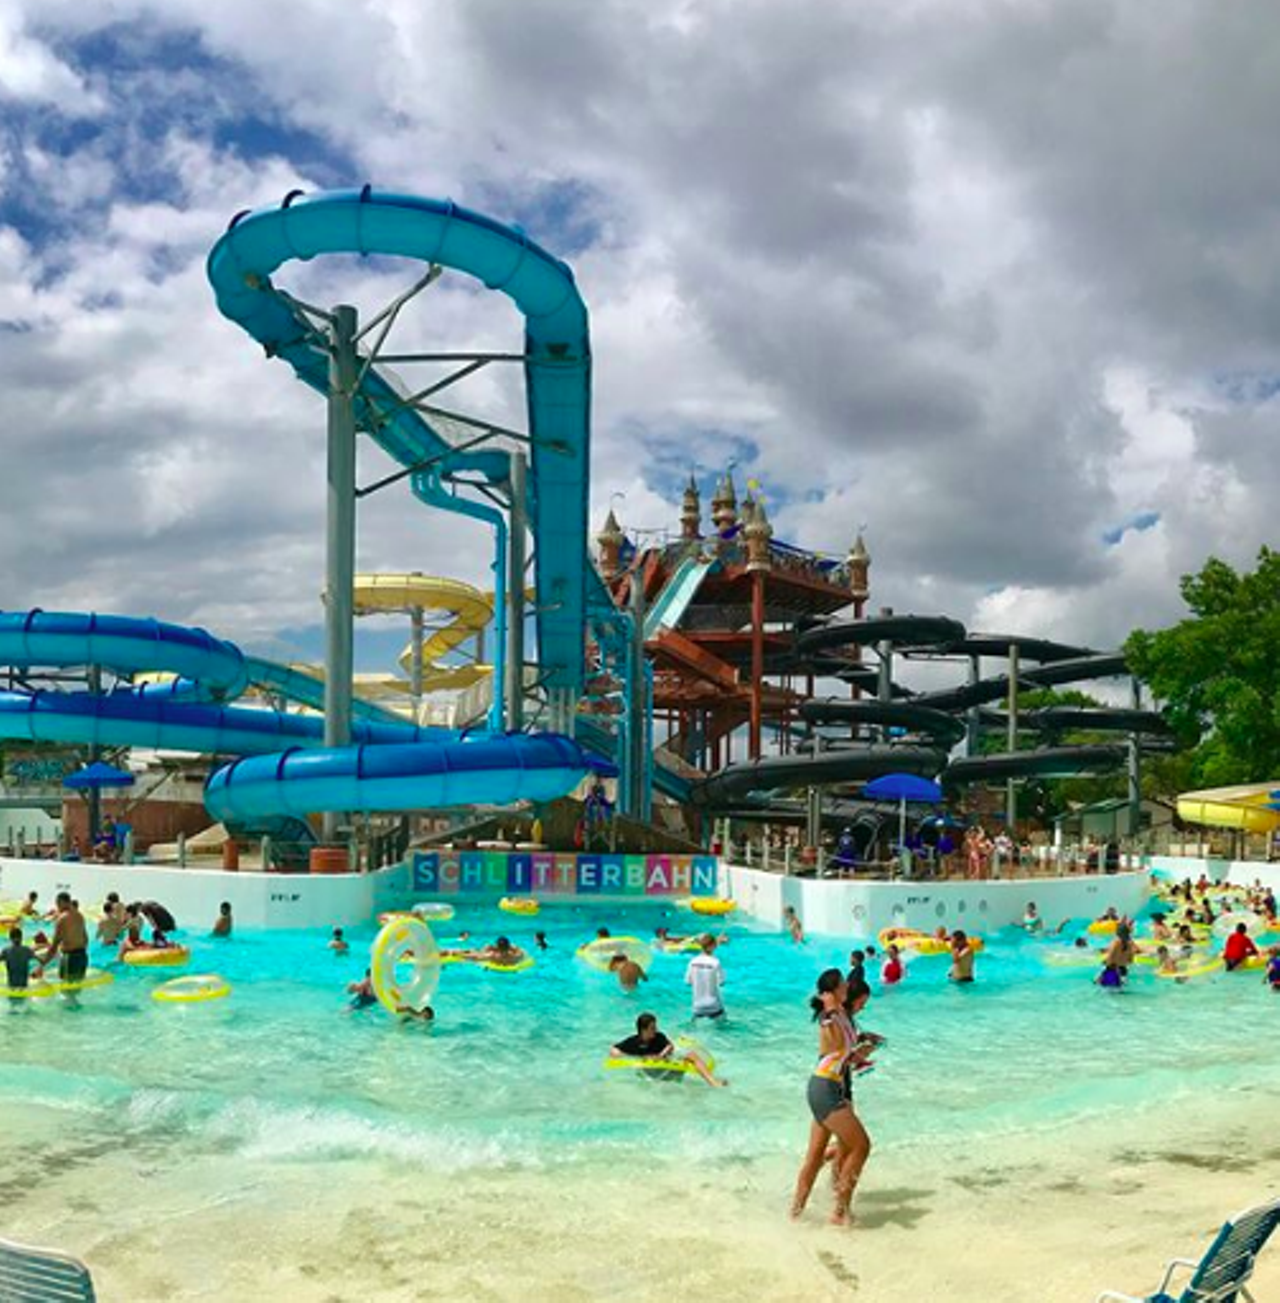 Going to a waterpark
To our way of thinking, there are better ways to cool off in the summer than floating in a highly chlorinated lazy river or standing in long lines for brief rides on giant slides. But, hey, your mileage may vary.
Photo via Instagram / schlitterbahnwaterparks